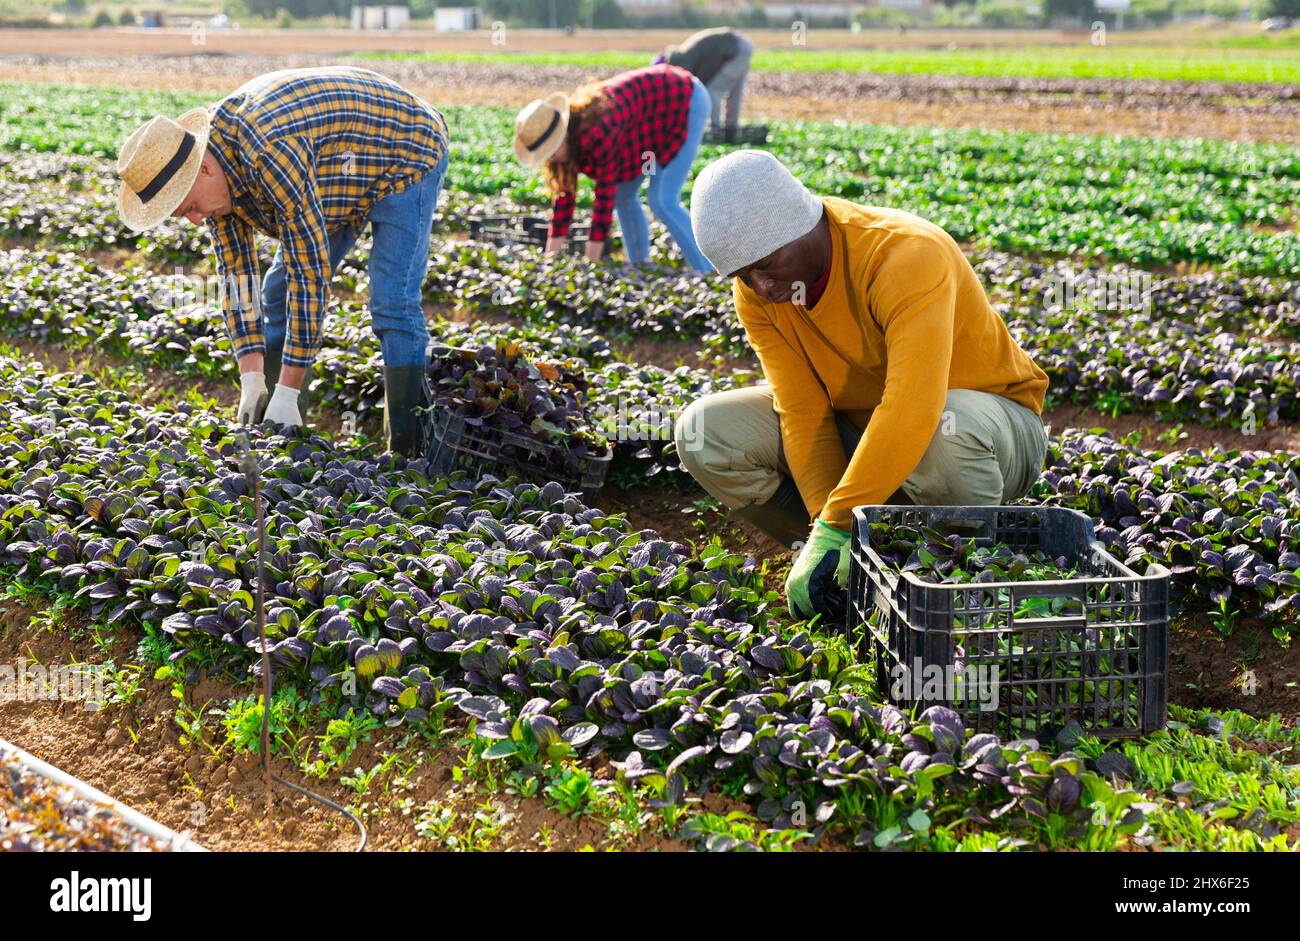 Hired employee harvesting red spinach in garden Stock Photo